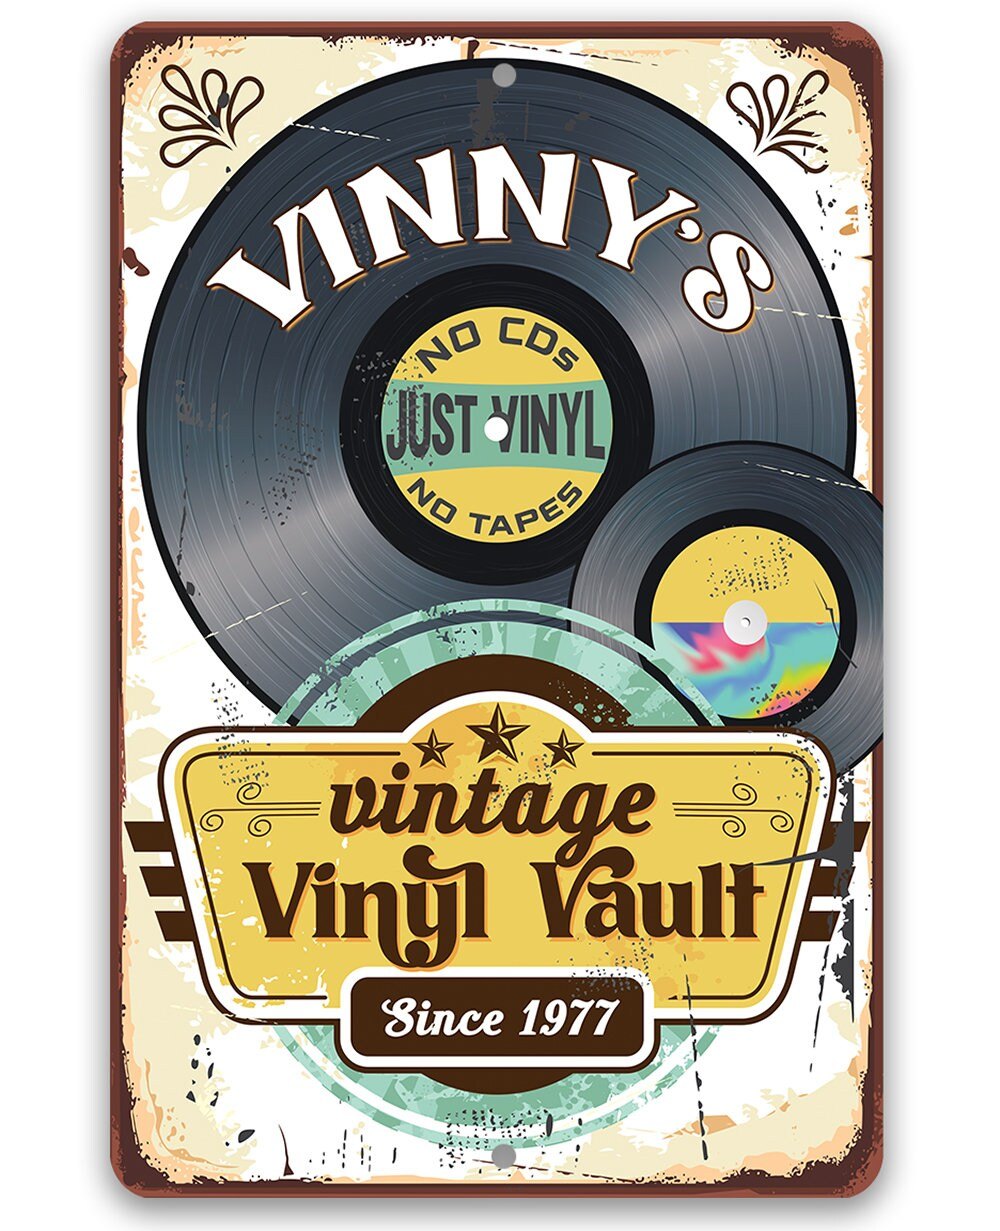 Personalized Tin - Vintage Vinyl Vault - 8" x 12" or 12" x 18" Aluminum Tin Awesome Metal Poster Lone Star Art 